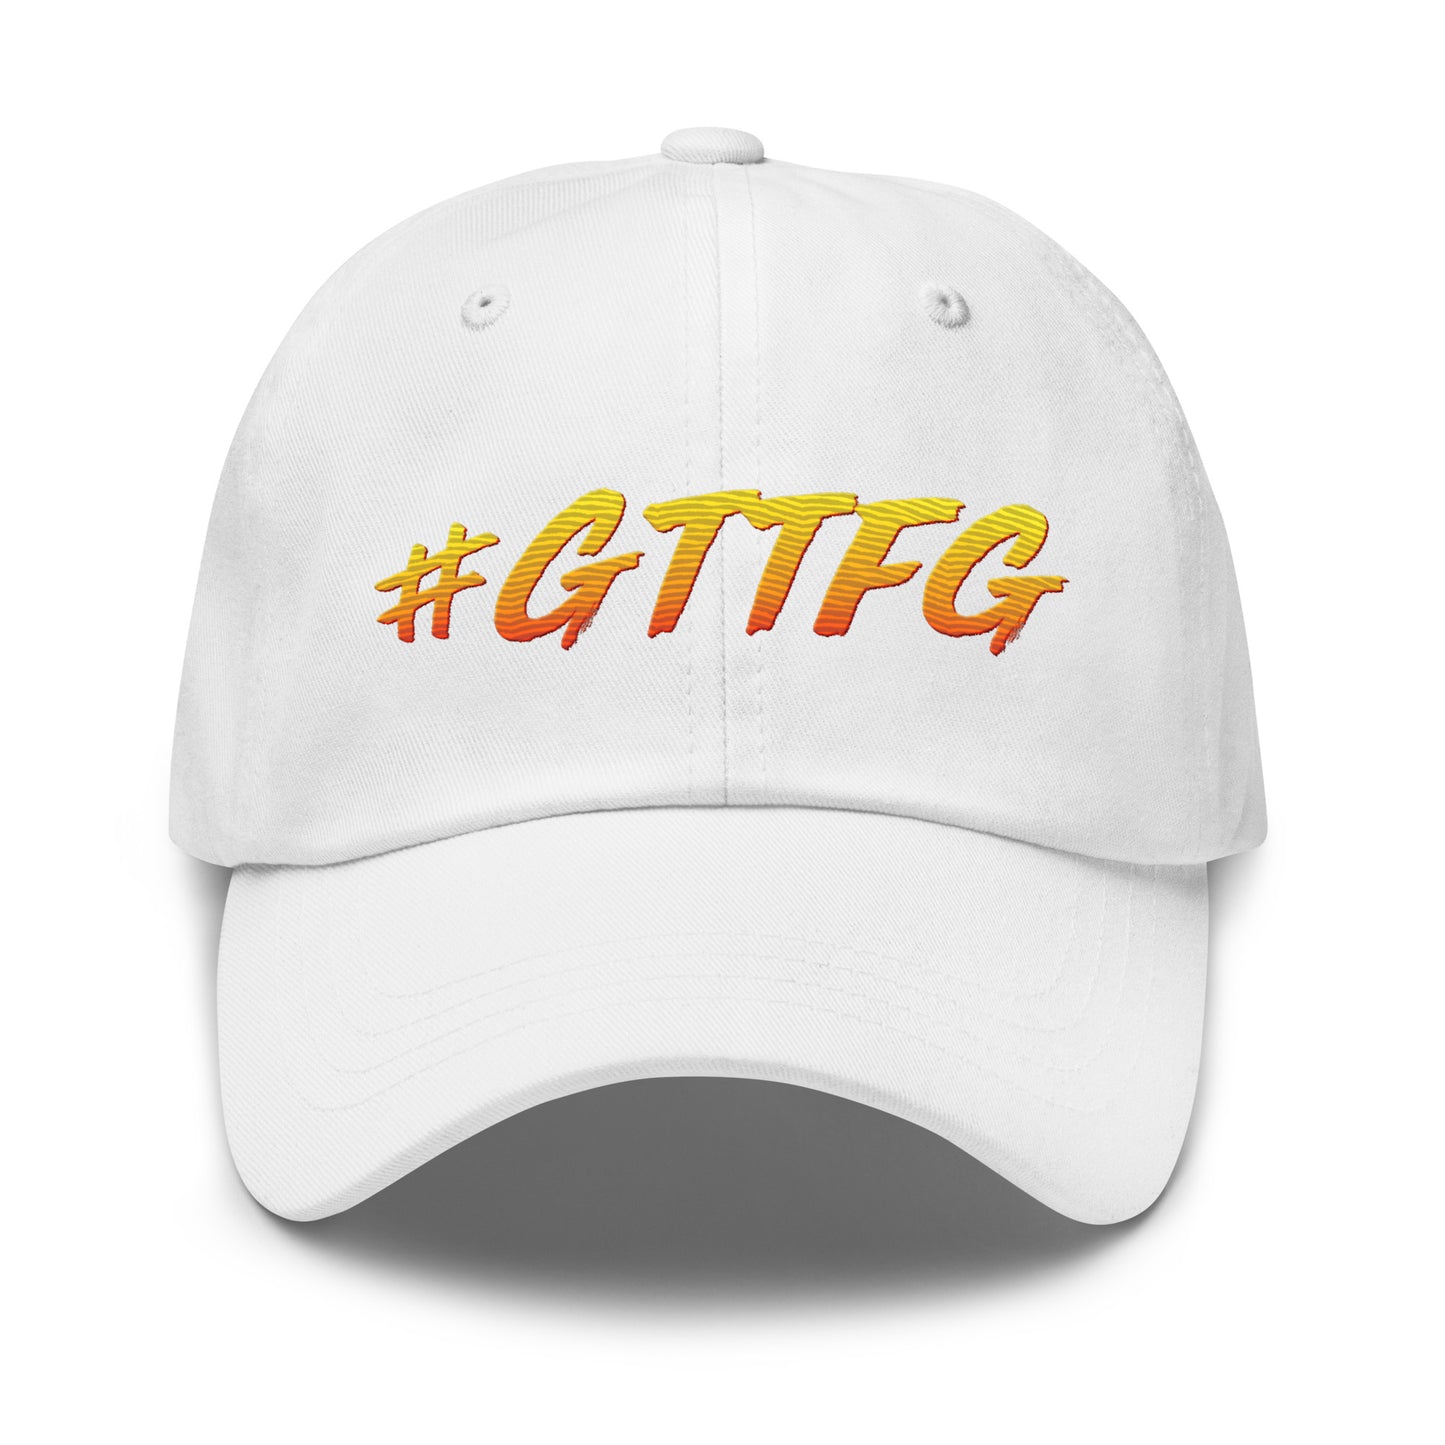 Go To The F*cking Gym Dad Hat